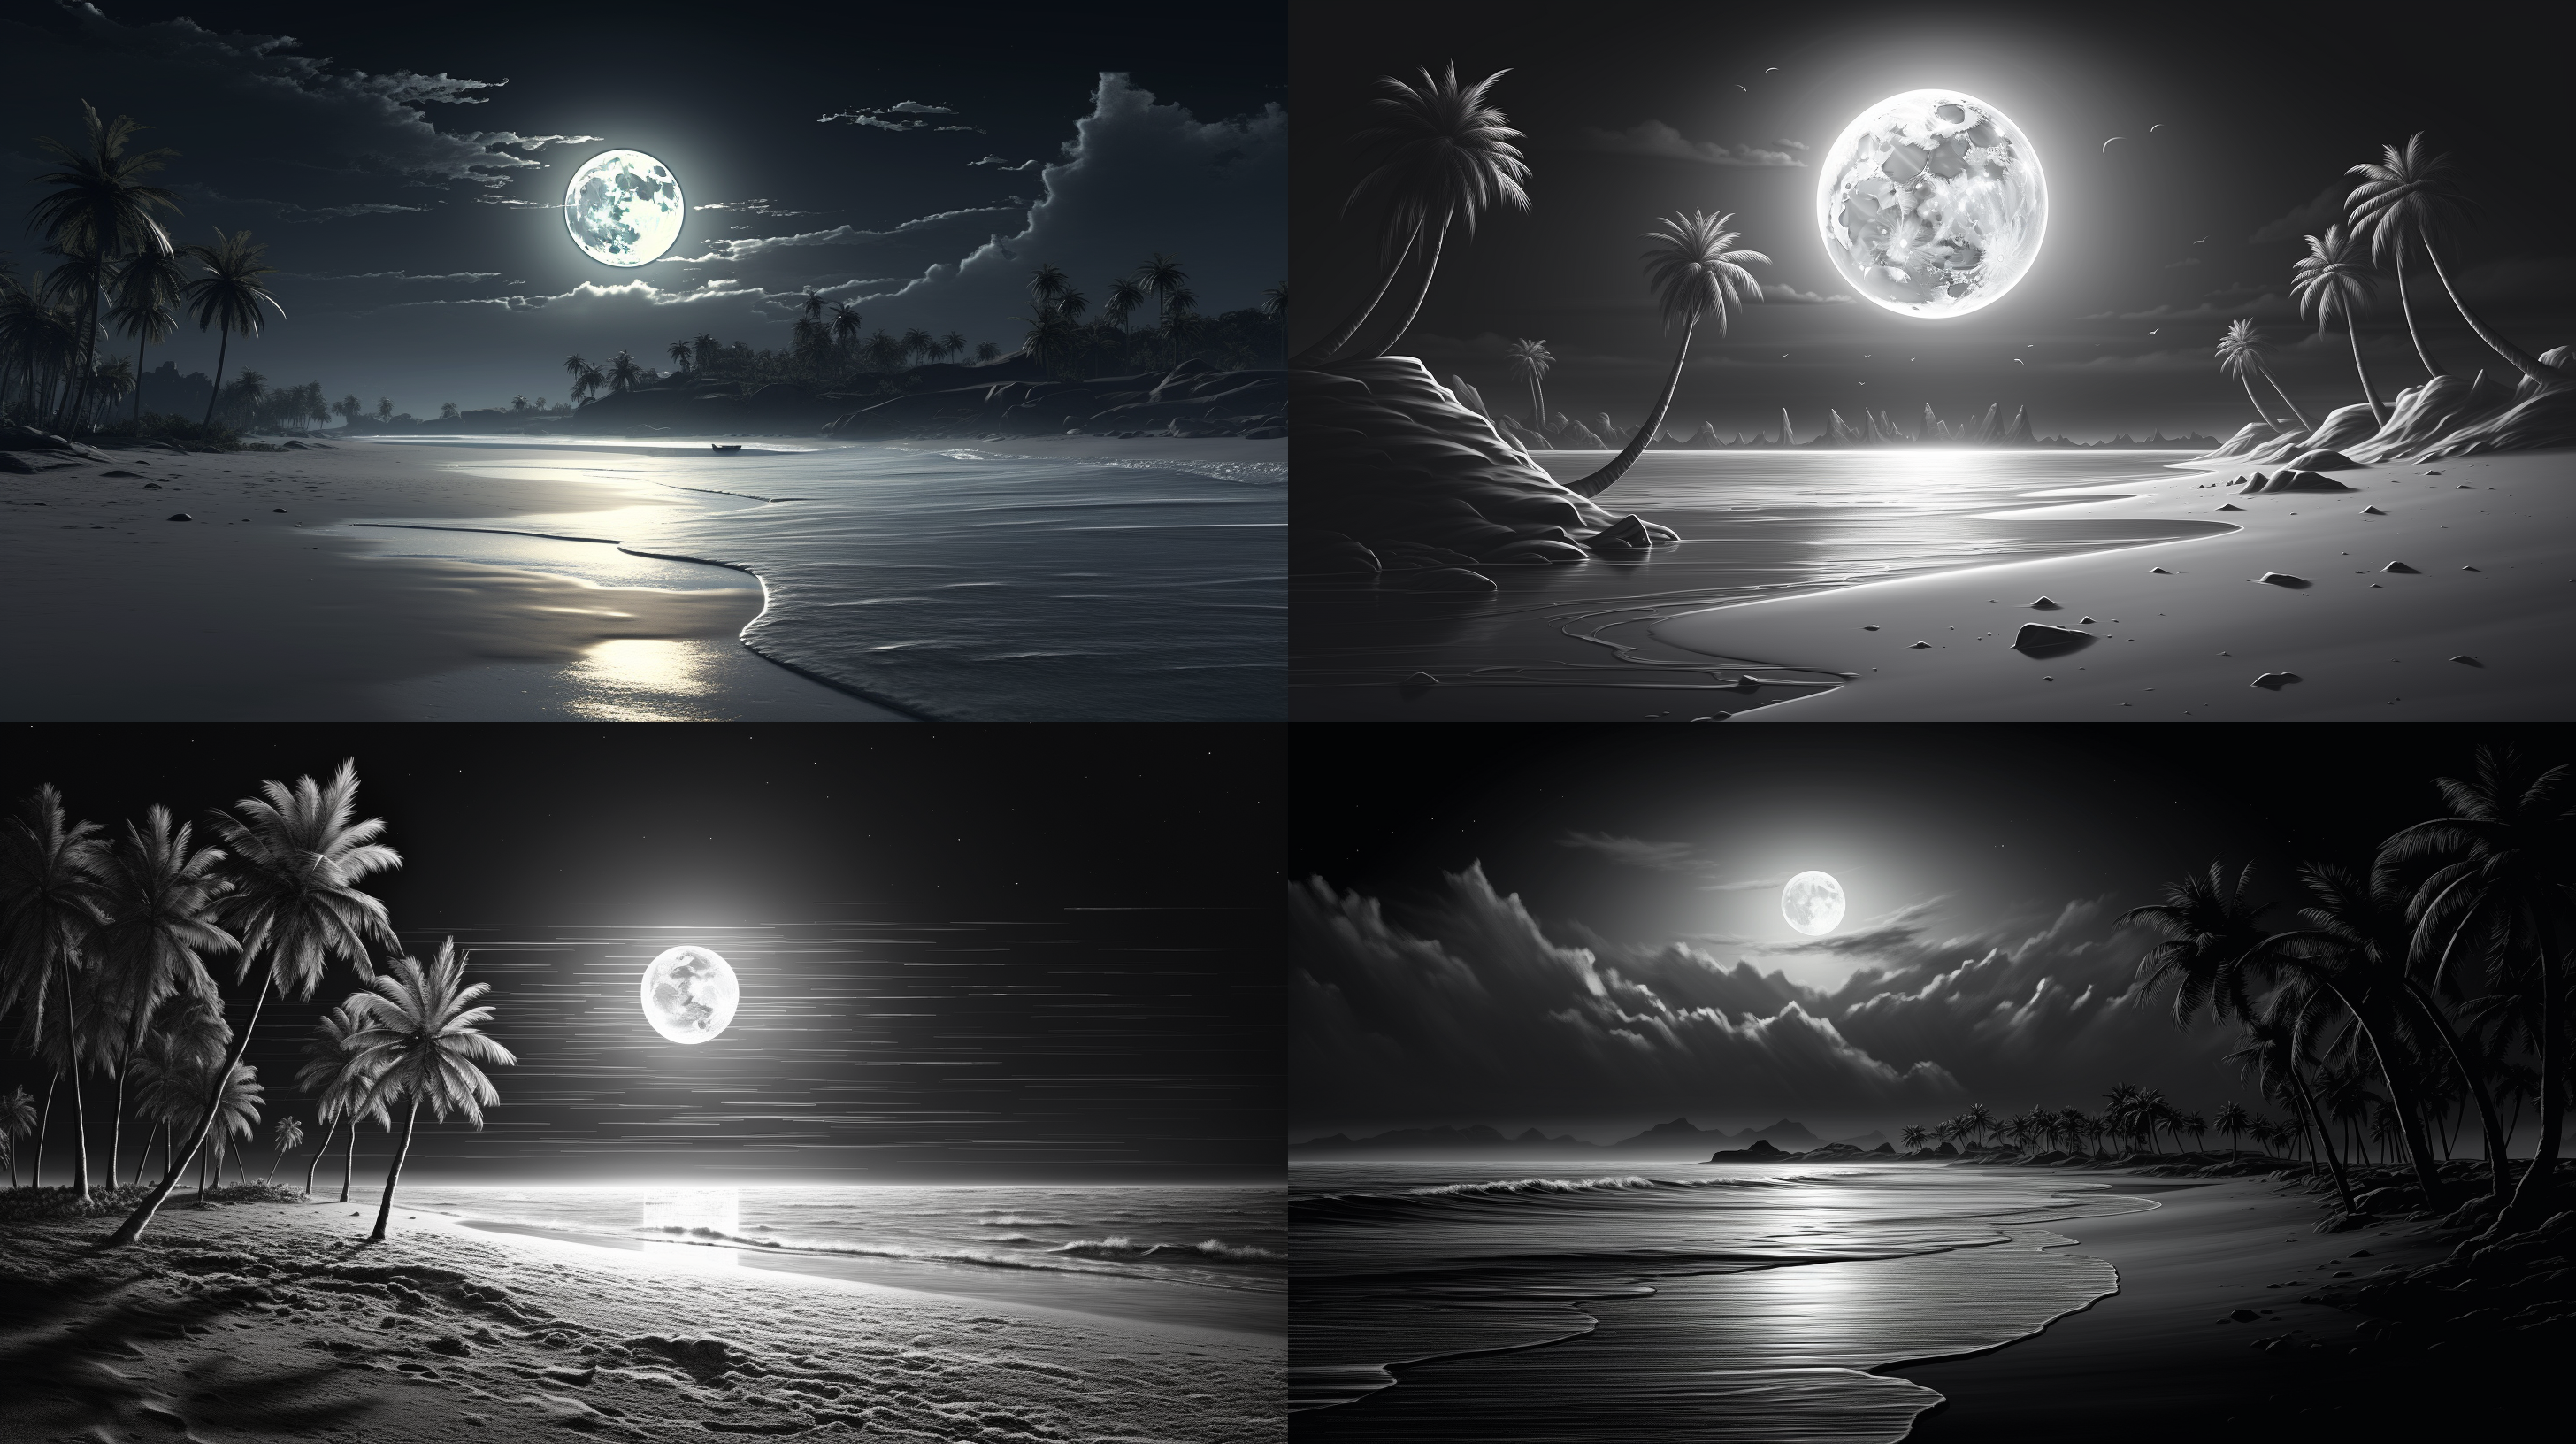 owravs A detailed pencil drawing of a serene moonlit beach. The 61ee3d0e dd0f 4a61 956e 34c5647a6010